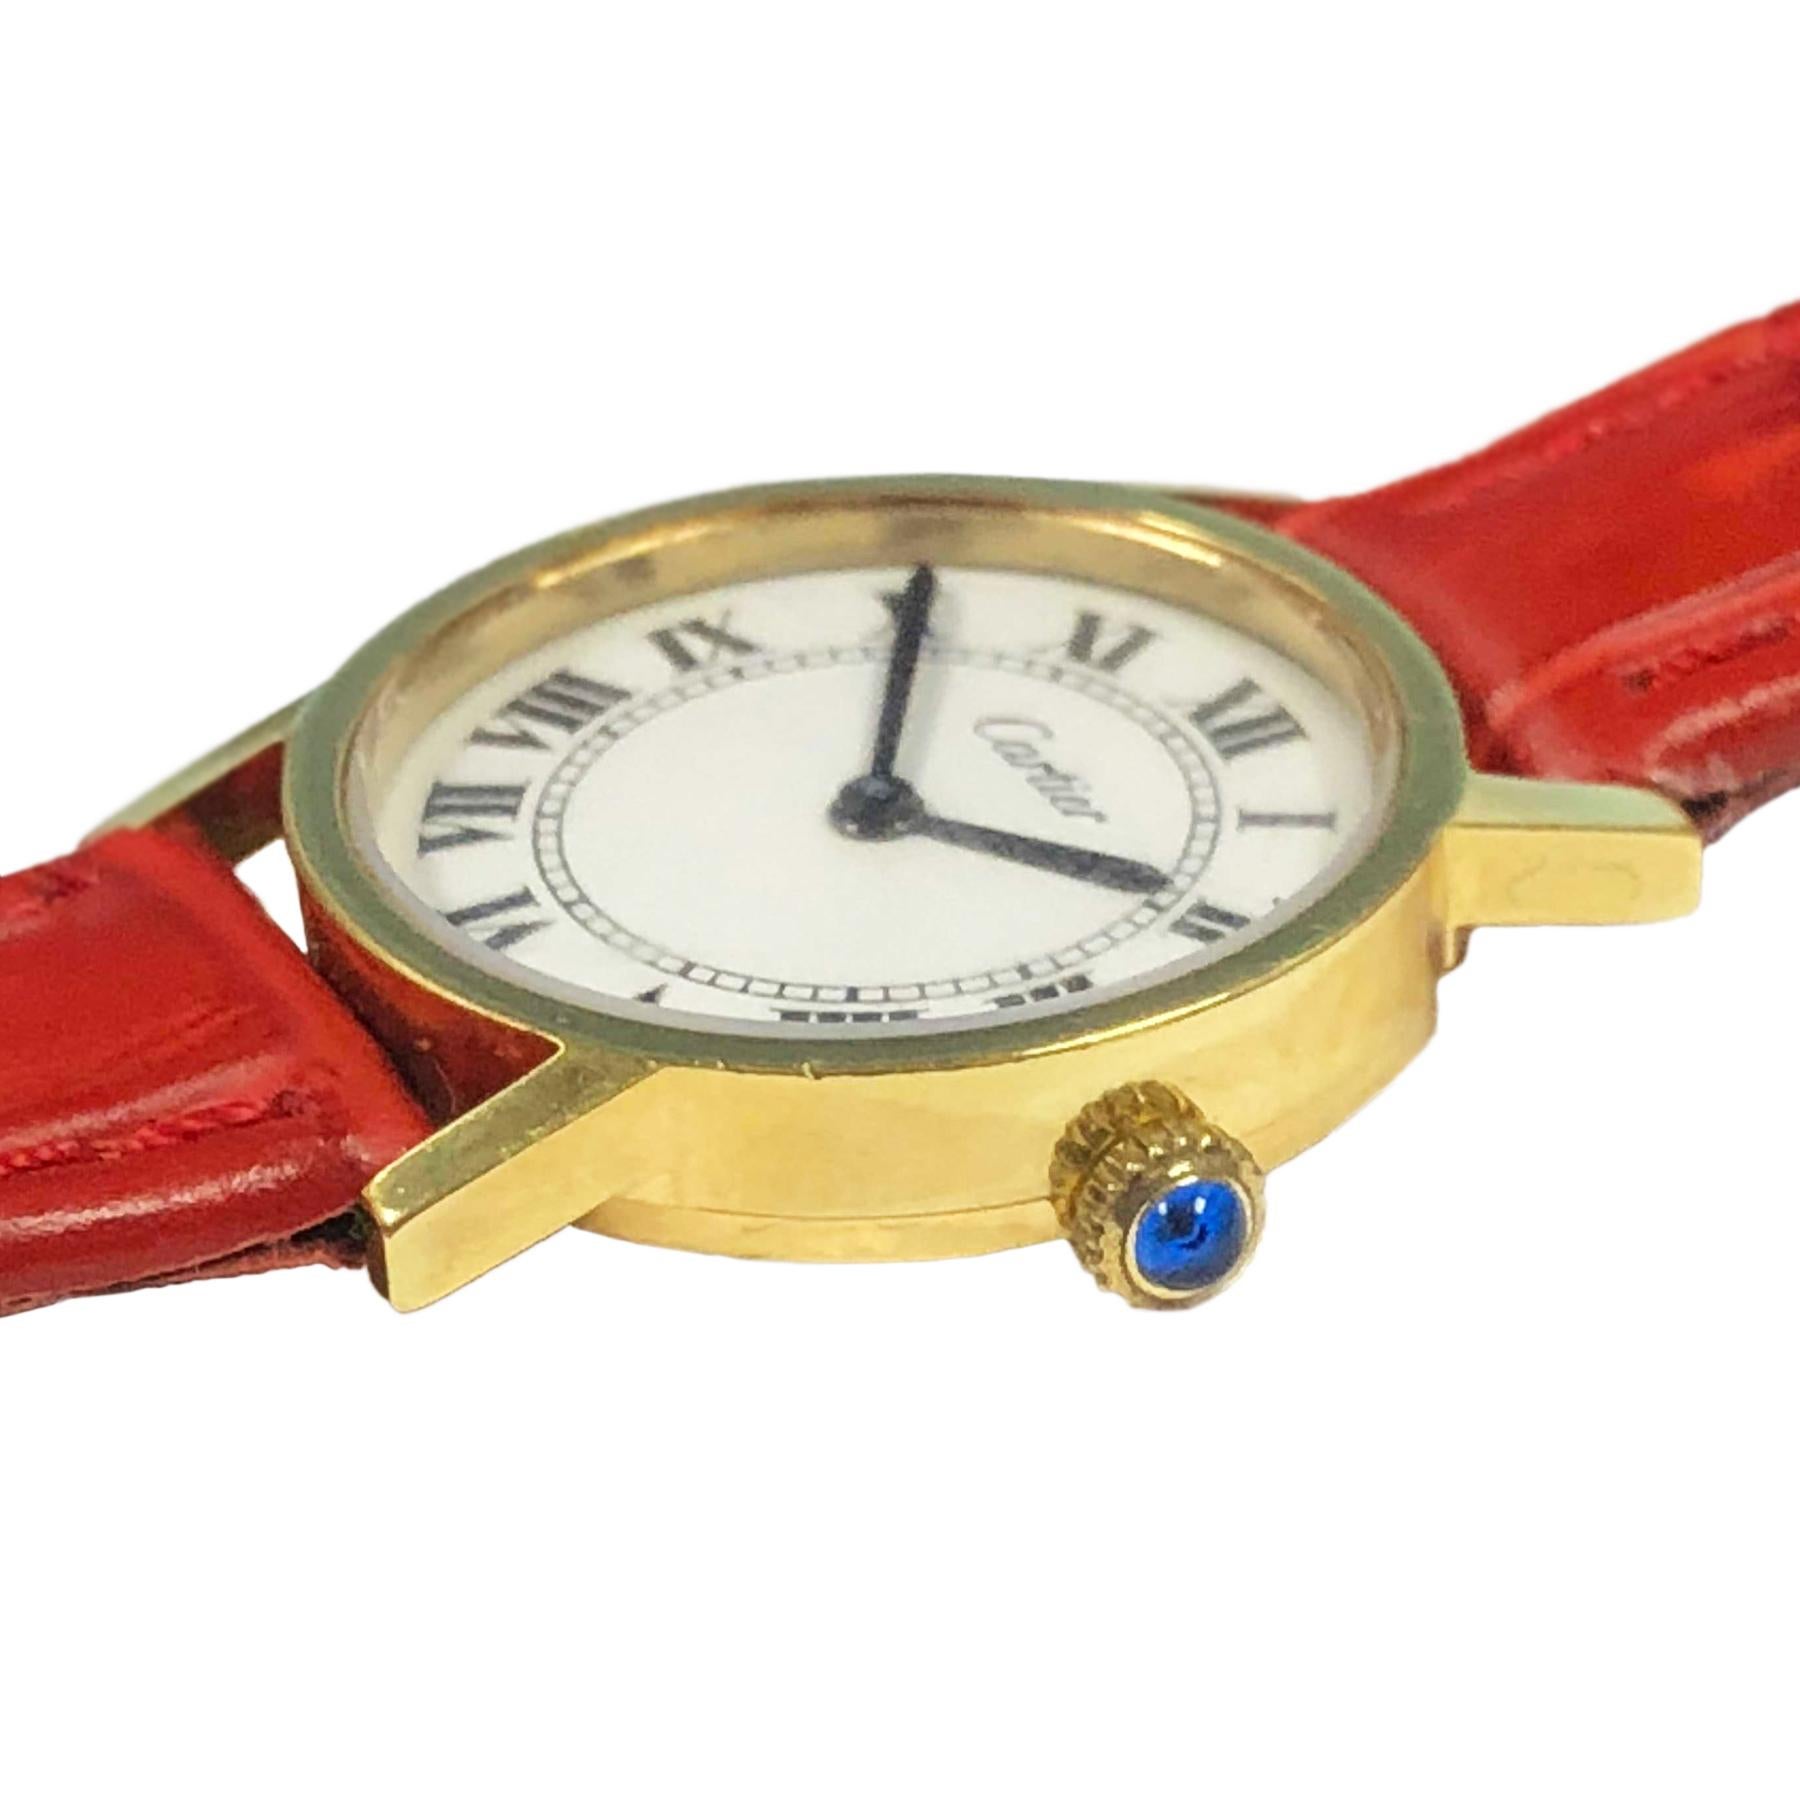 Circa 1970s Cartier Ladies Wrist Watch, 24 MM 2 piece Gold Plate Case, 17 Jewel Cartier Inc. Mechanical, Manual wind movement. White Dial with Black Roman Numerals, Sapphire set crown. New Hadley Roma Red Textured strap with Cartier gold Plate Tang